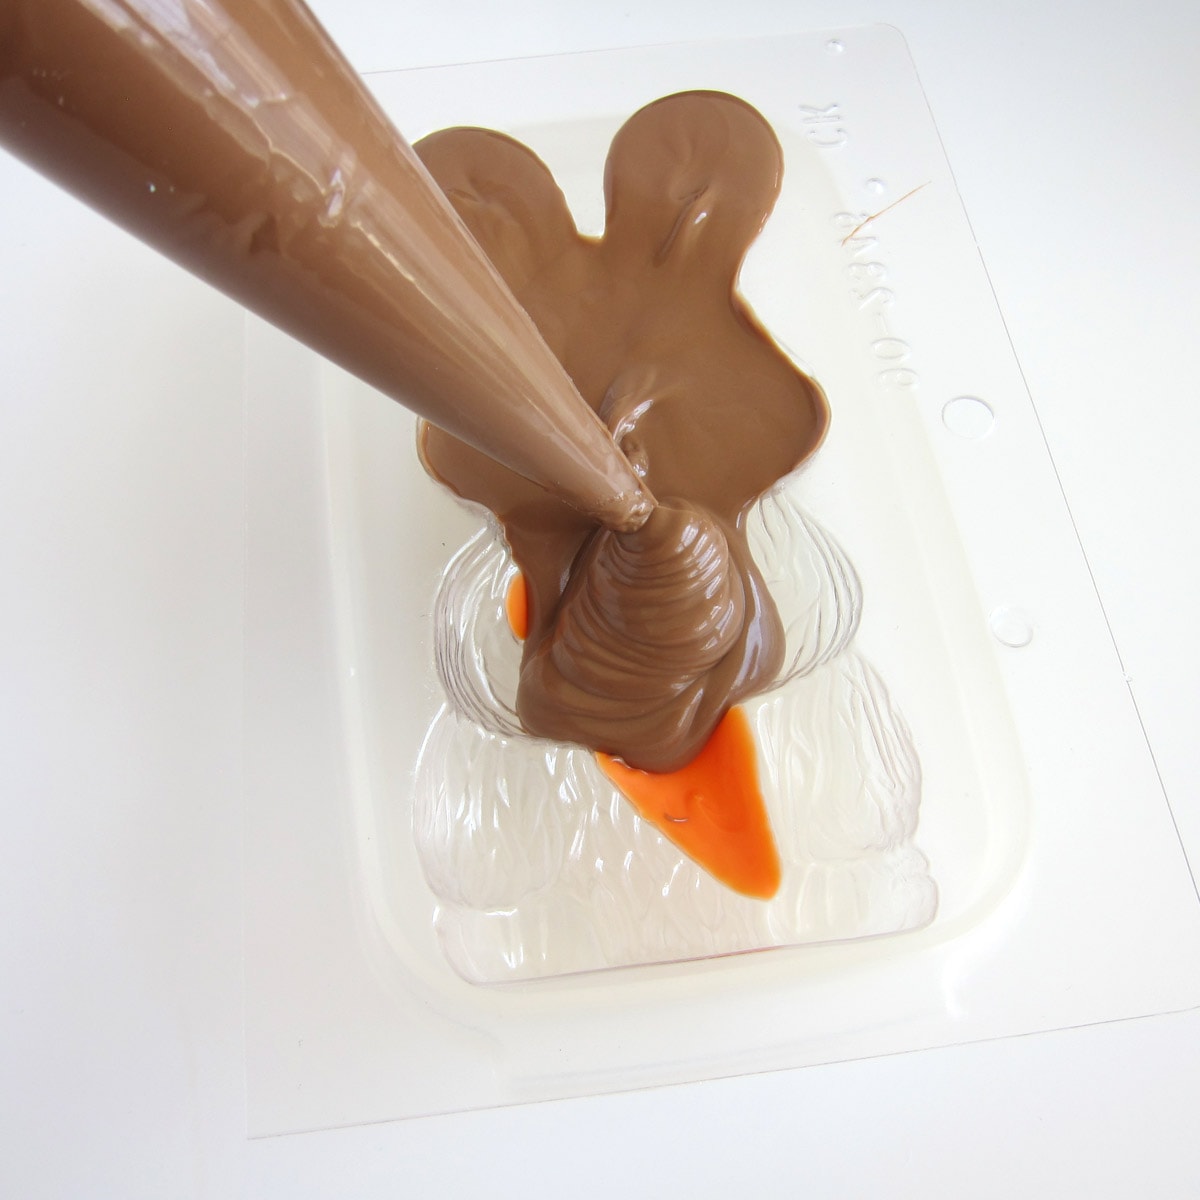 Fill the bunny candy mold with chocolate.